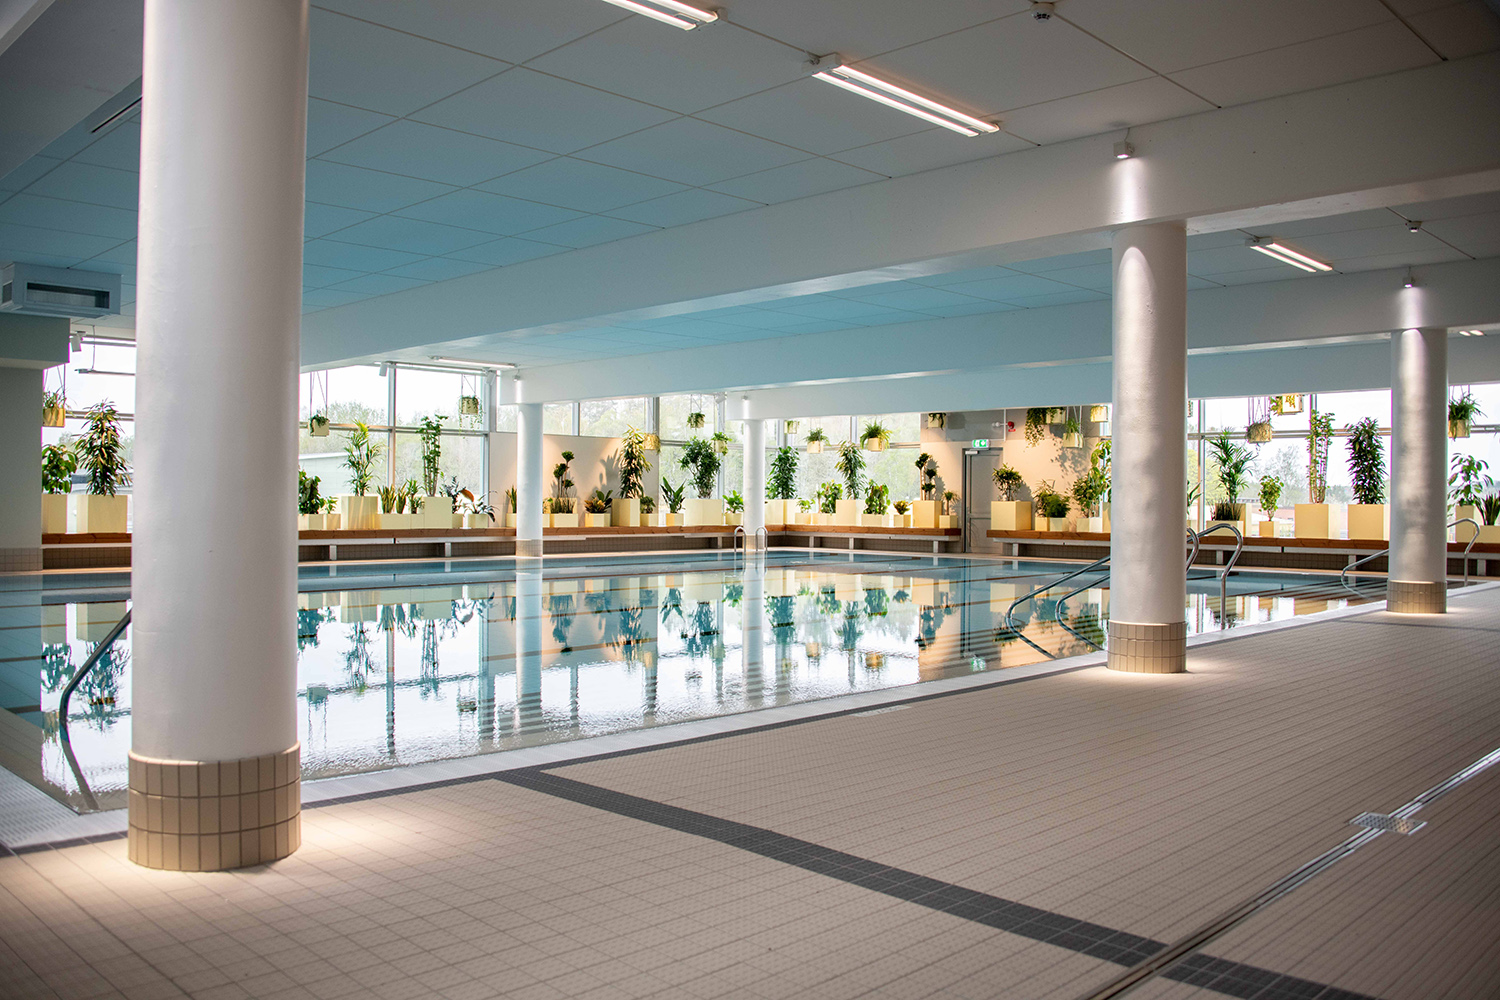 An indoor swimmingpool with green plants in the background.